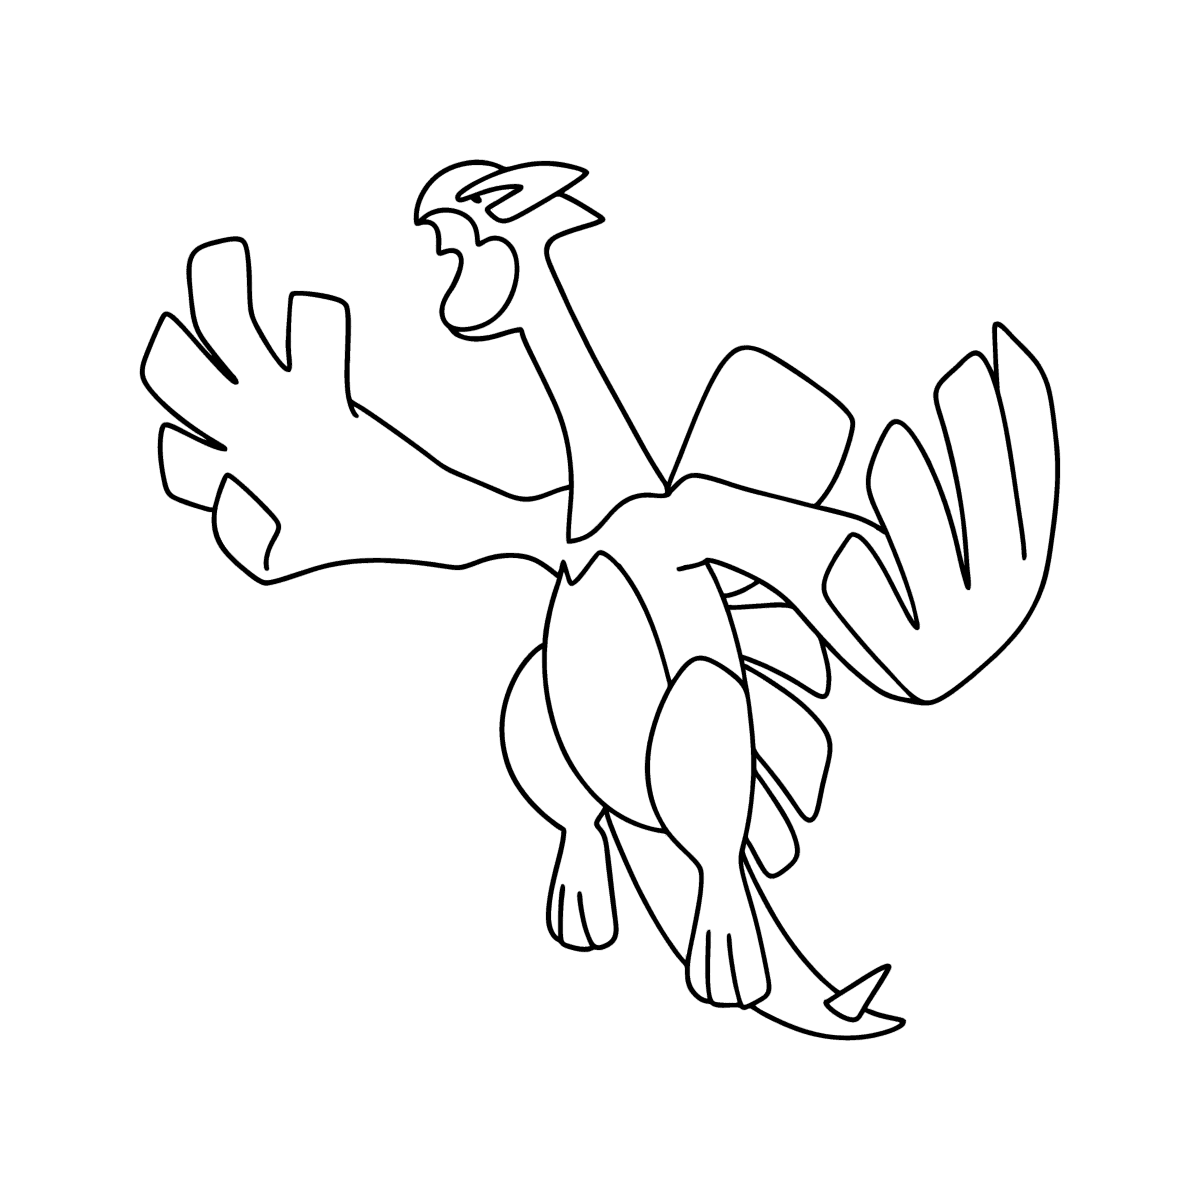 Legendary lugia pokemon coloring pages